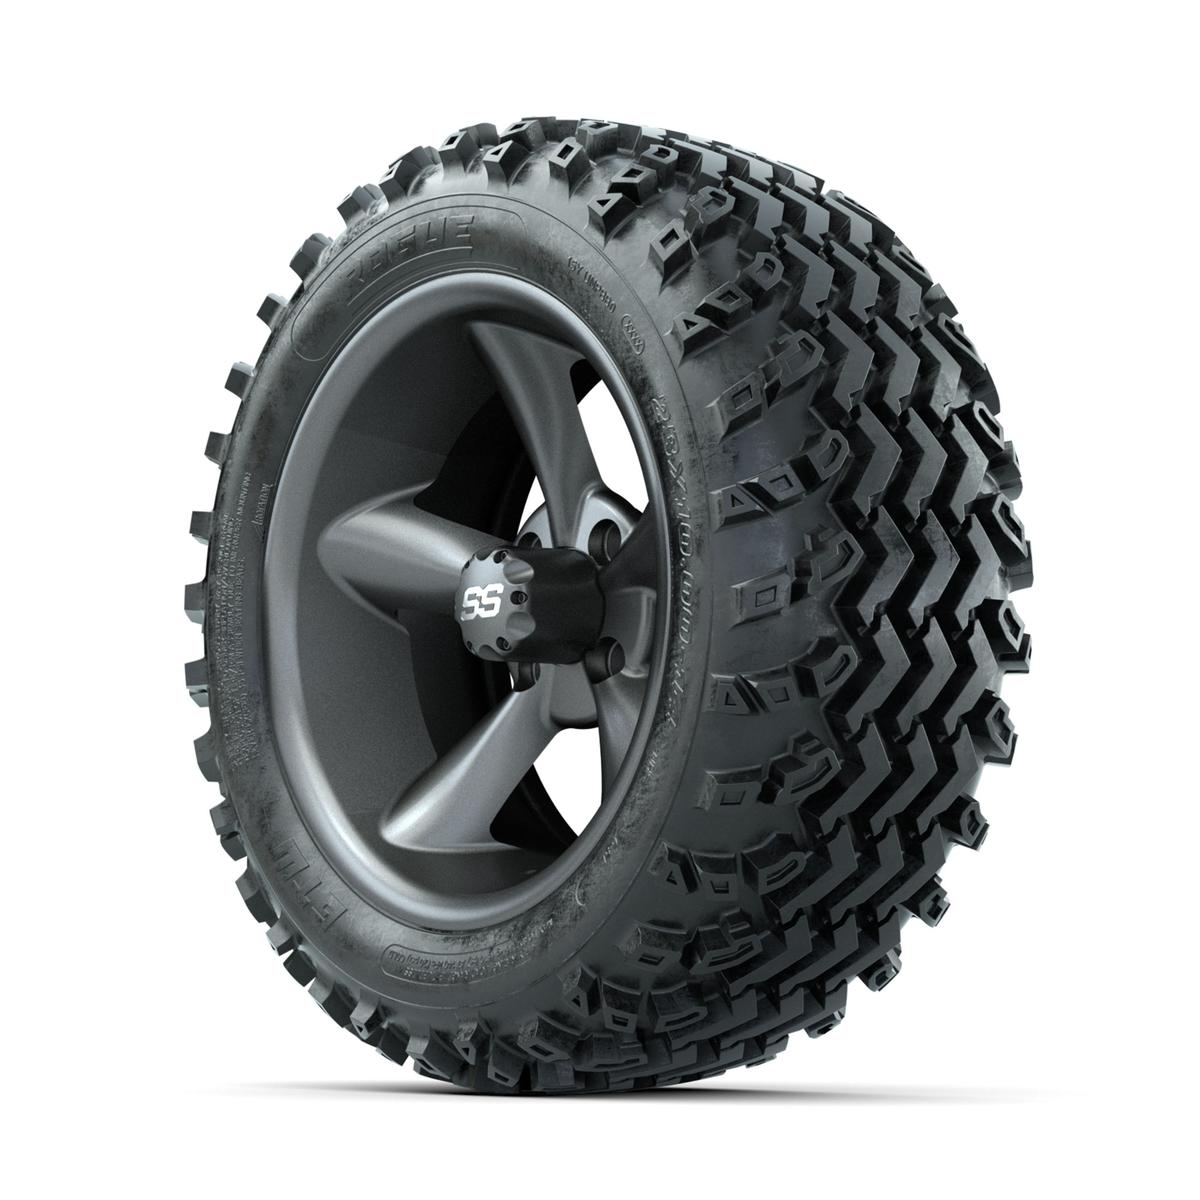 GTW Godfather Matte Grey 14 in Wheels with 23x10.00-14 Rogue All Terrain Tires – Full Set